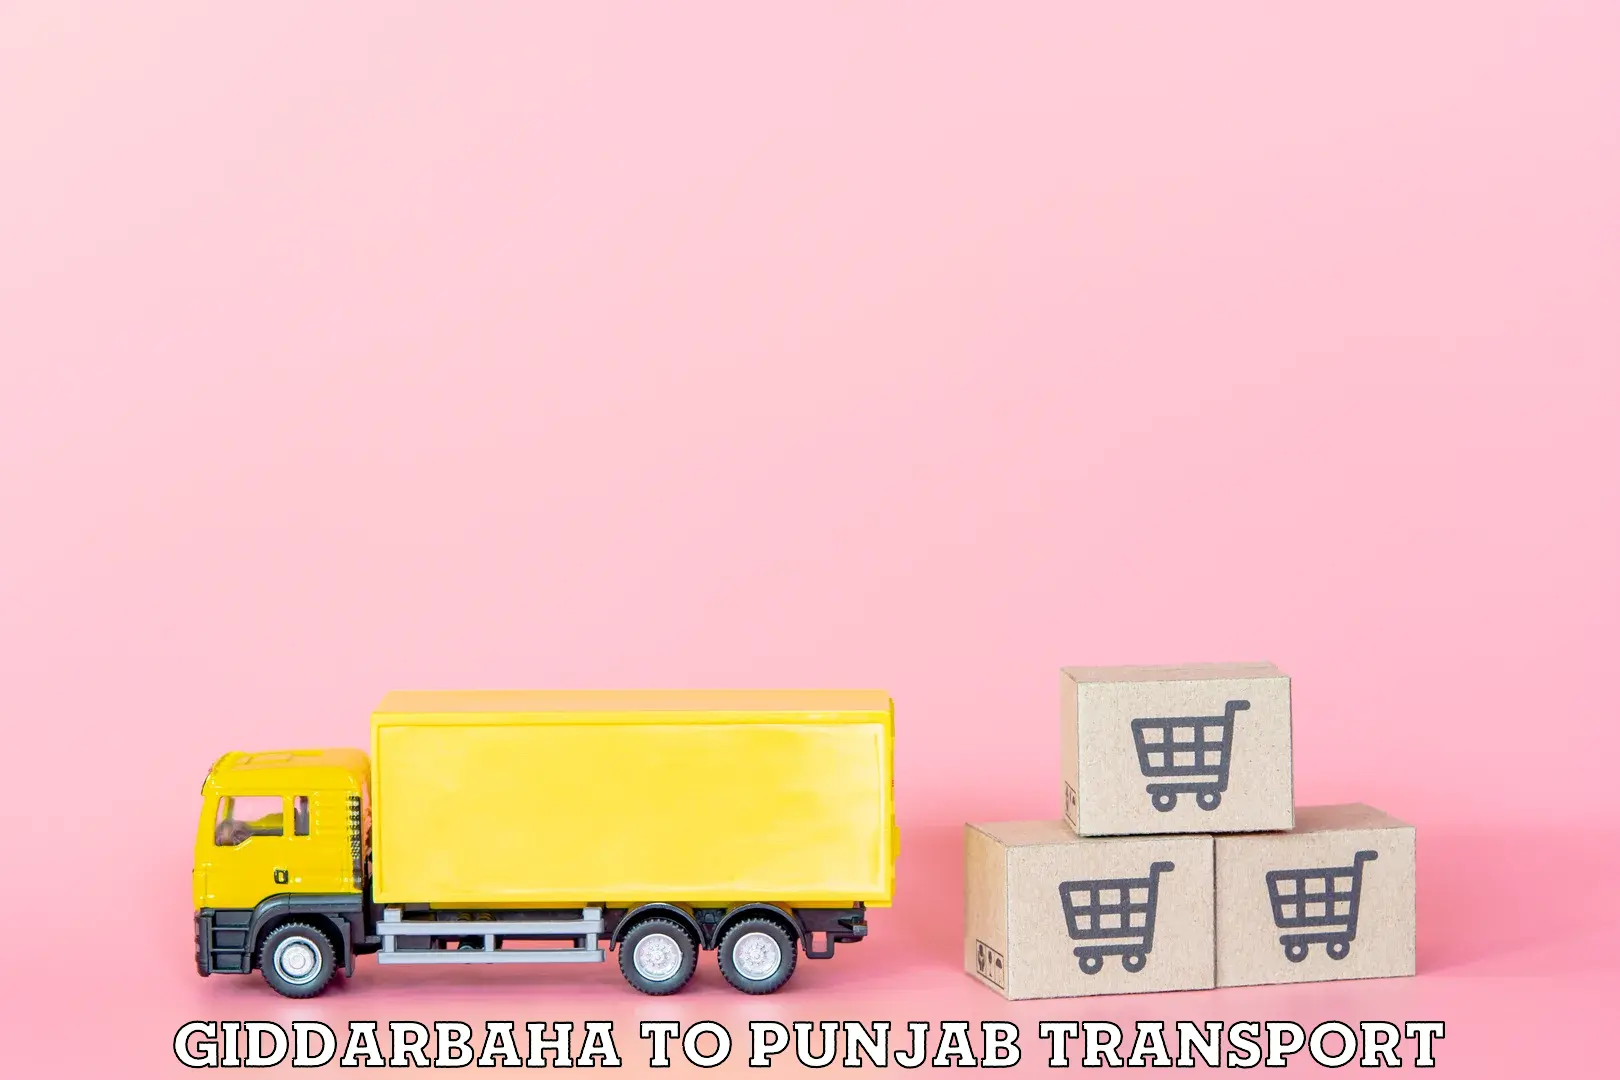 Daily parcel service transport in Giddarbaha to Patiala